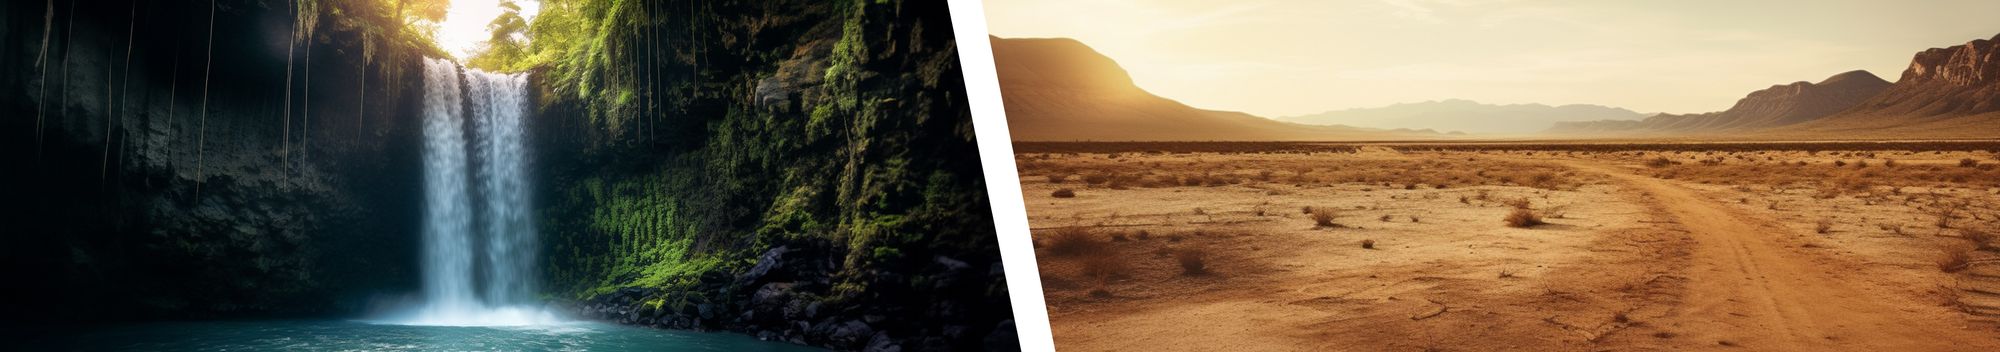 Separate images of a waterfall and a desert to represent different Uppbeat travel music playlists.